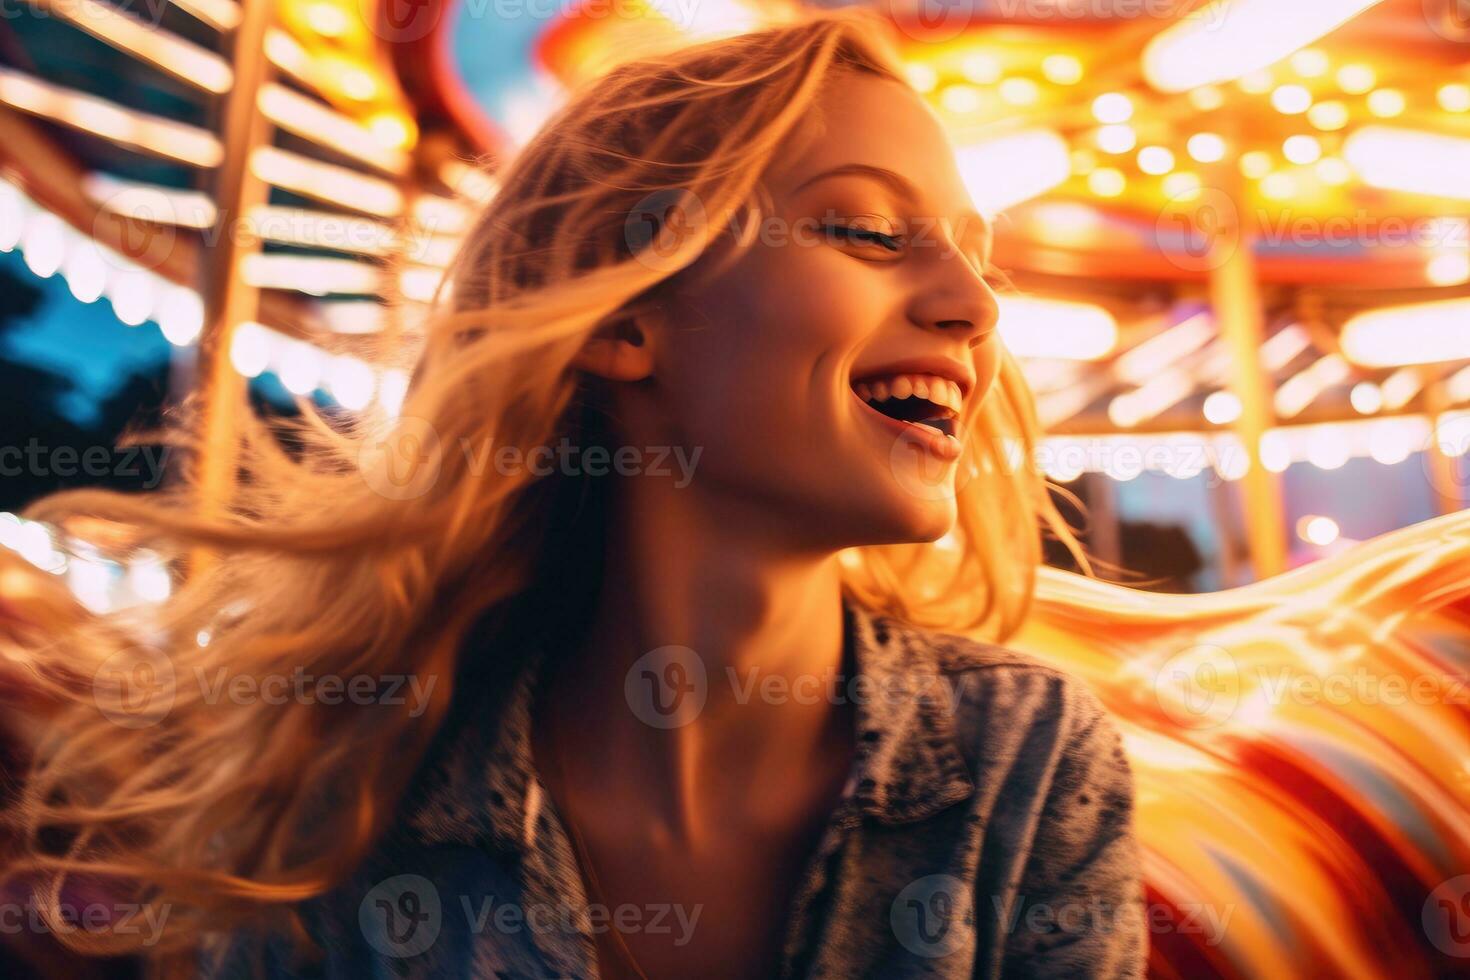 A Close Up Shot Of A Girl Her Hair Blowing In The Wind As She Rides A Carousel At An